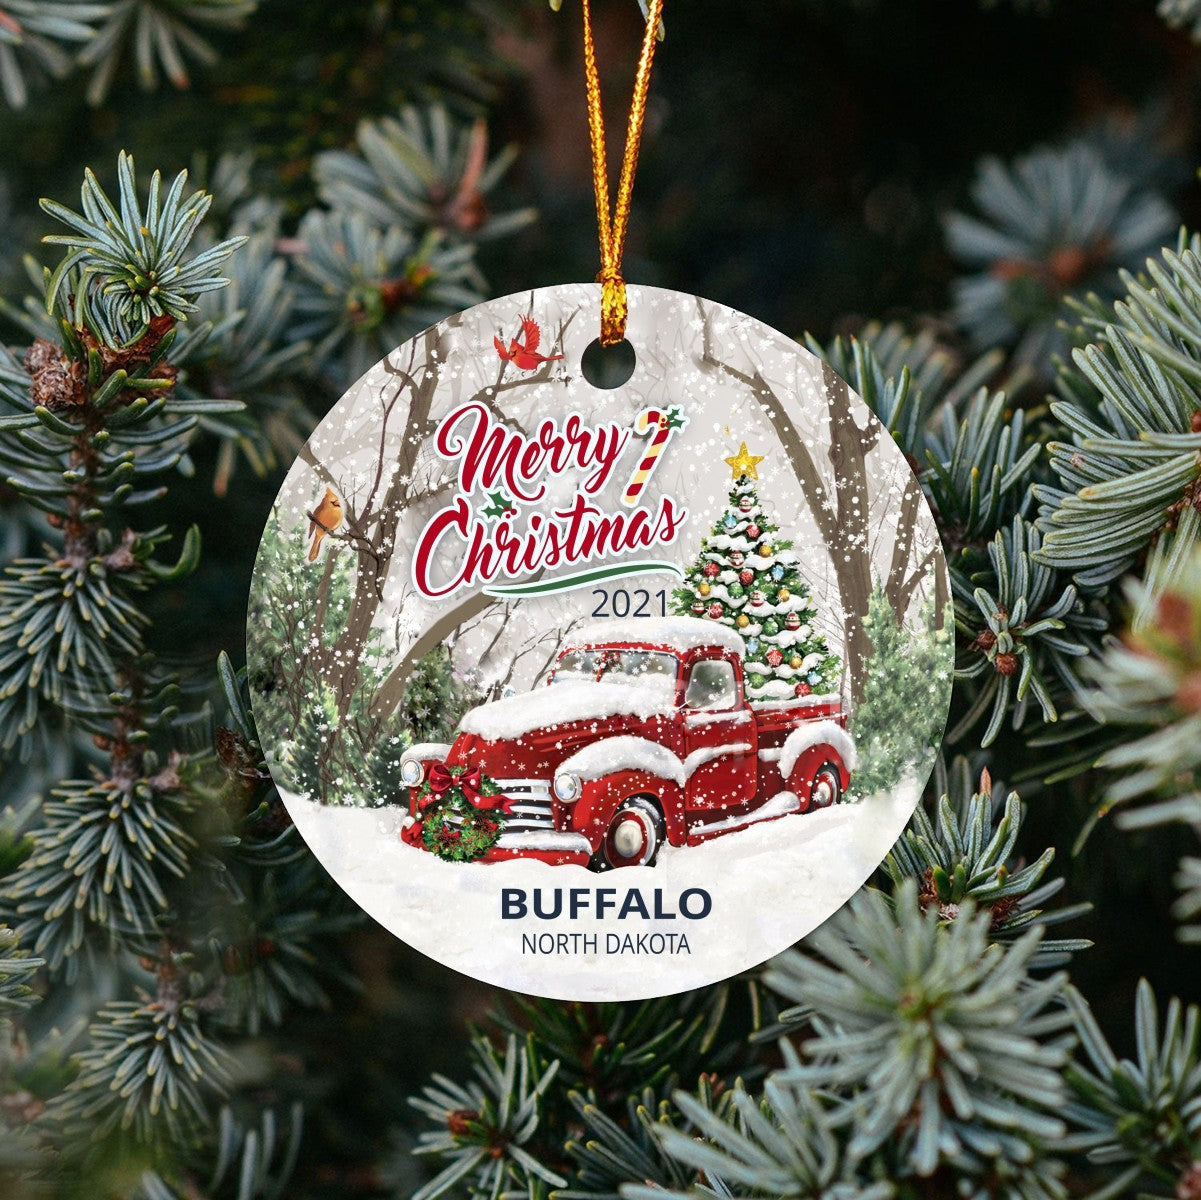 Christmas Tree Ornaments Buffalo - Ornament With Name City, State Buffalo North Dakota ND Ornament - Red Truck Xmas Ornaments 3'' Plastic Gift For Family, Friend And Housewarming